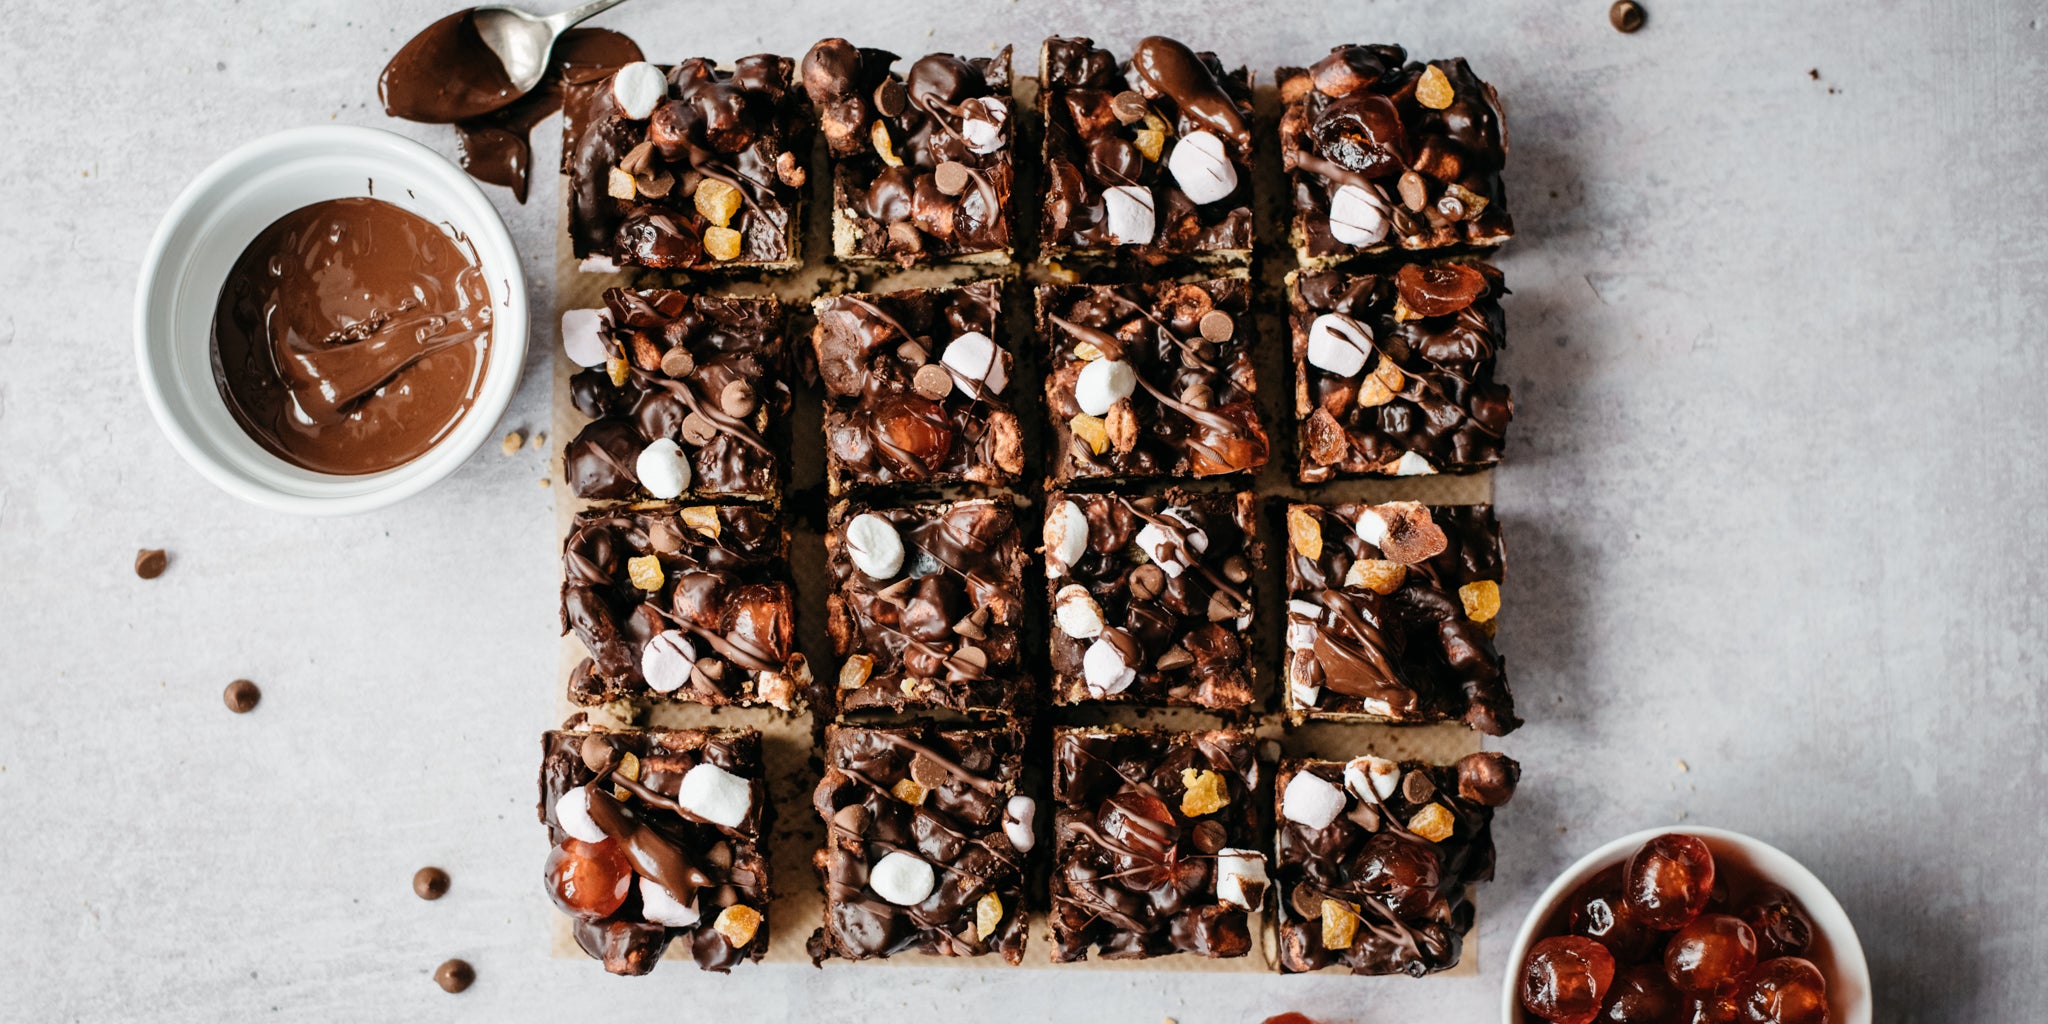 Top view of Vegan Rocky Road traybake sliced into squares, next to a bowl of melted chocolate and glace cherries